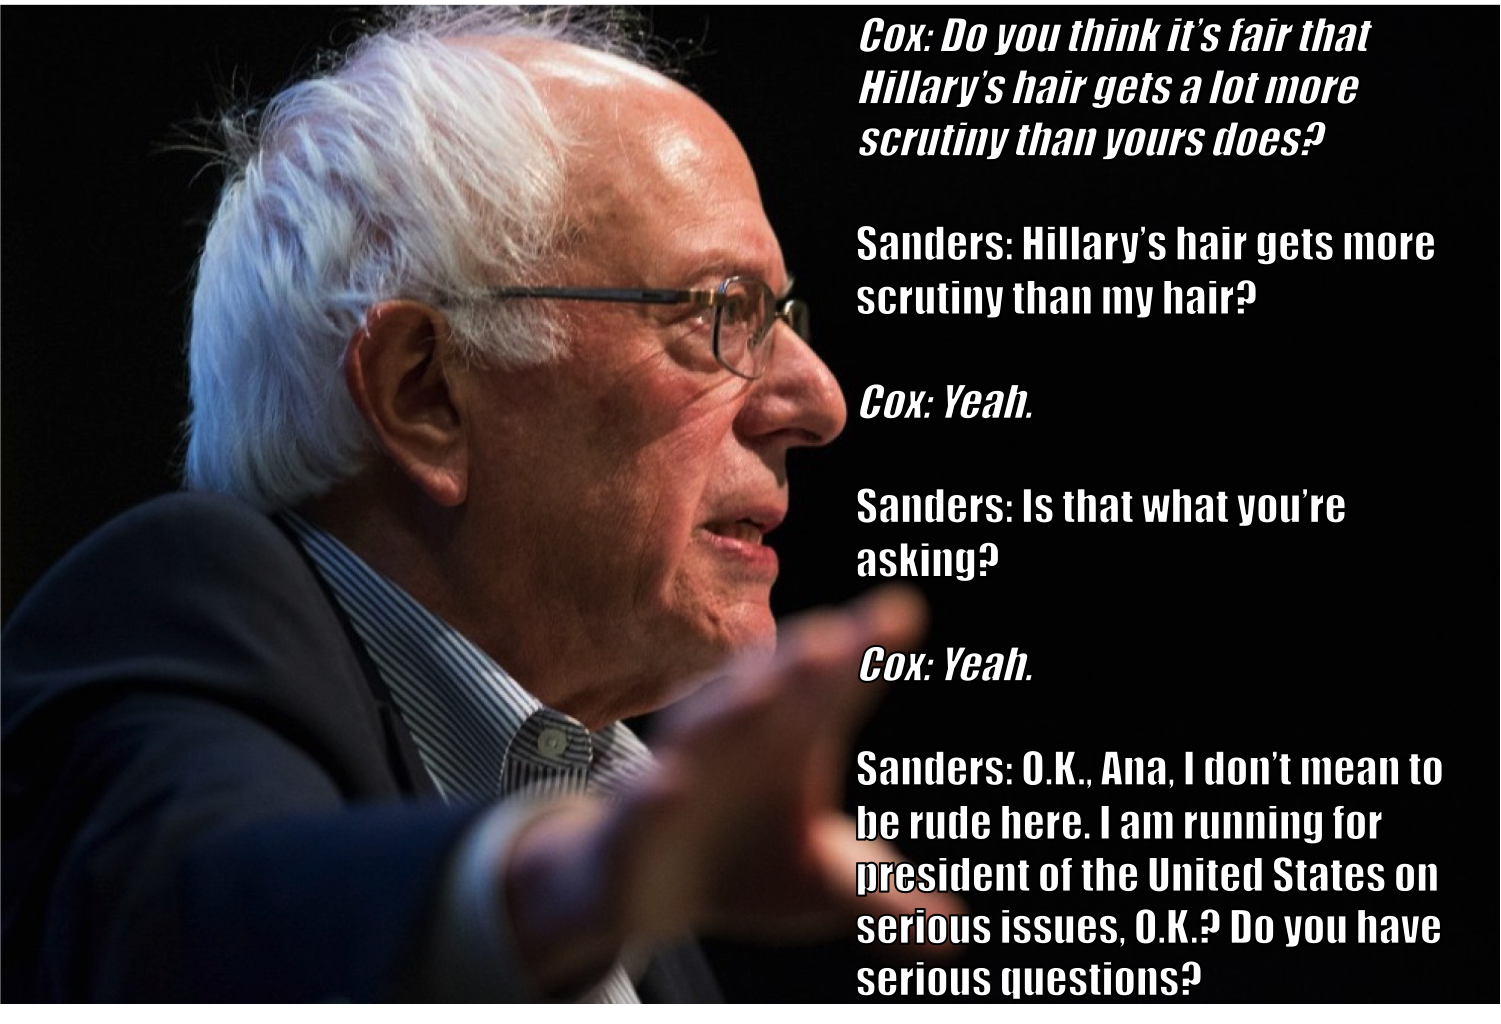 human behavior - Cox Do you think it's fair that Hillary's hair gets a lot more scrutiny than your's does? Sanders Hillary's hair gets more scrutiny than my hair? Cox Yeah. Sanders Is that what you're asking? Cox Yeah. Sanders O.K., Ana, I don't mean to b